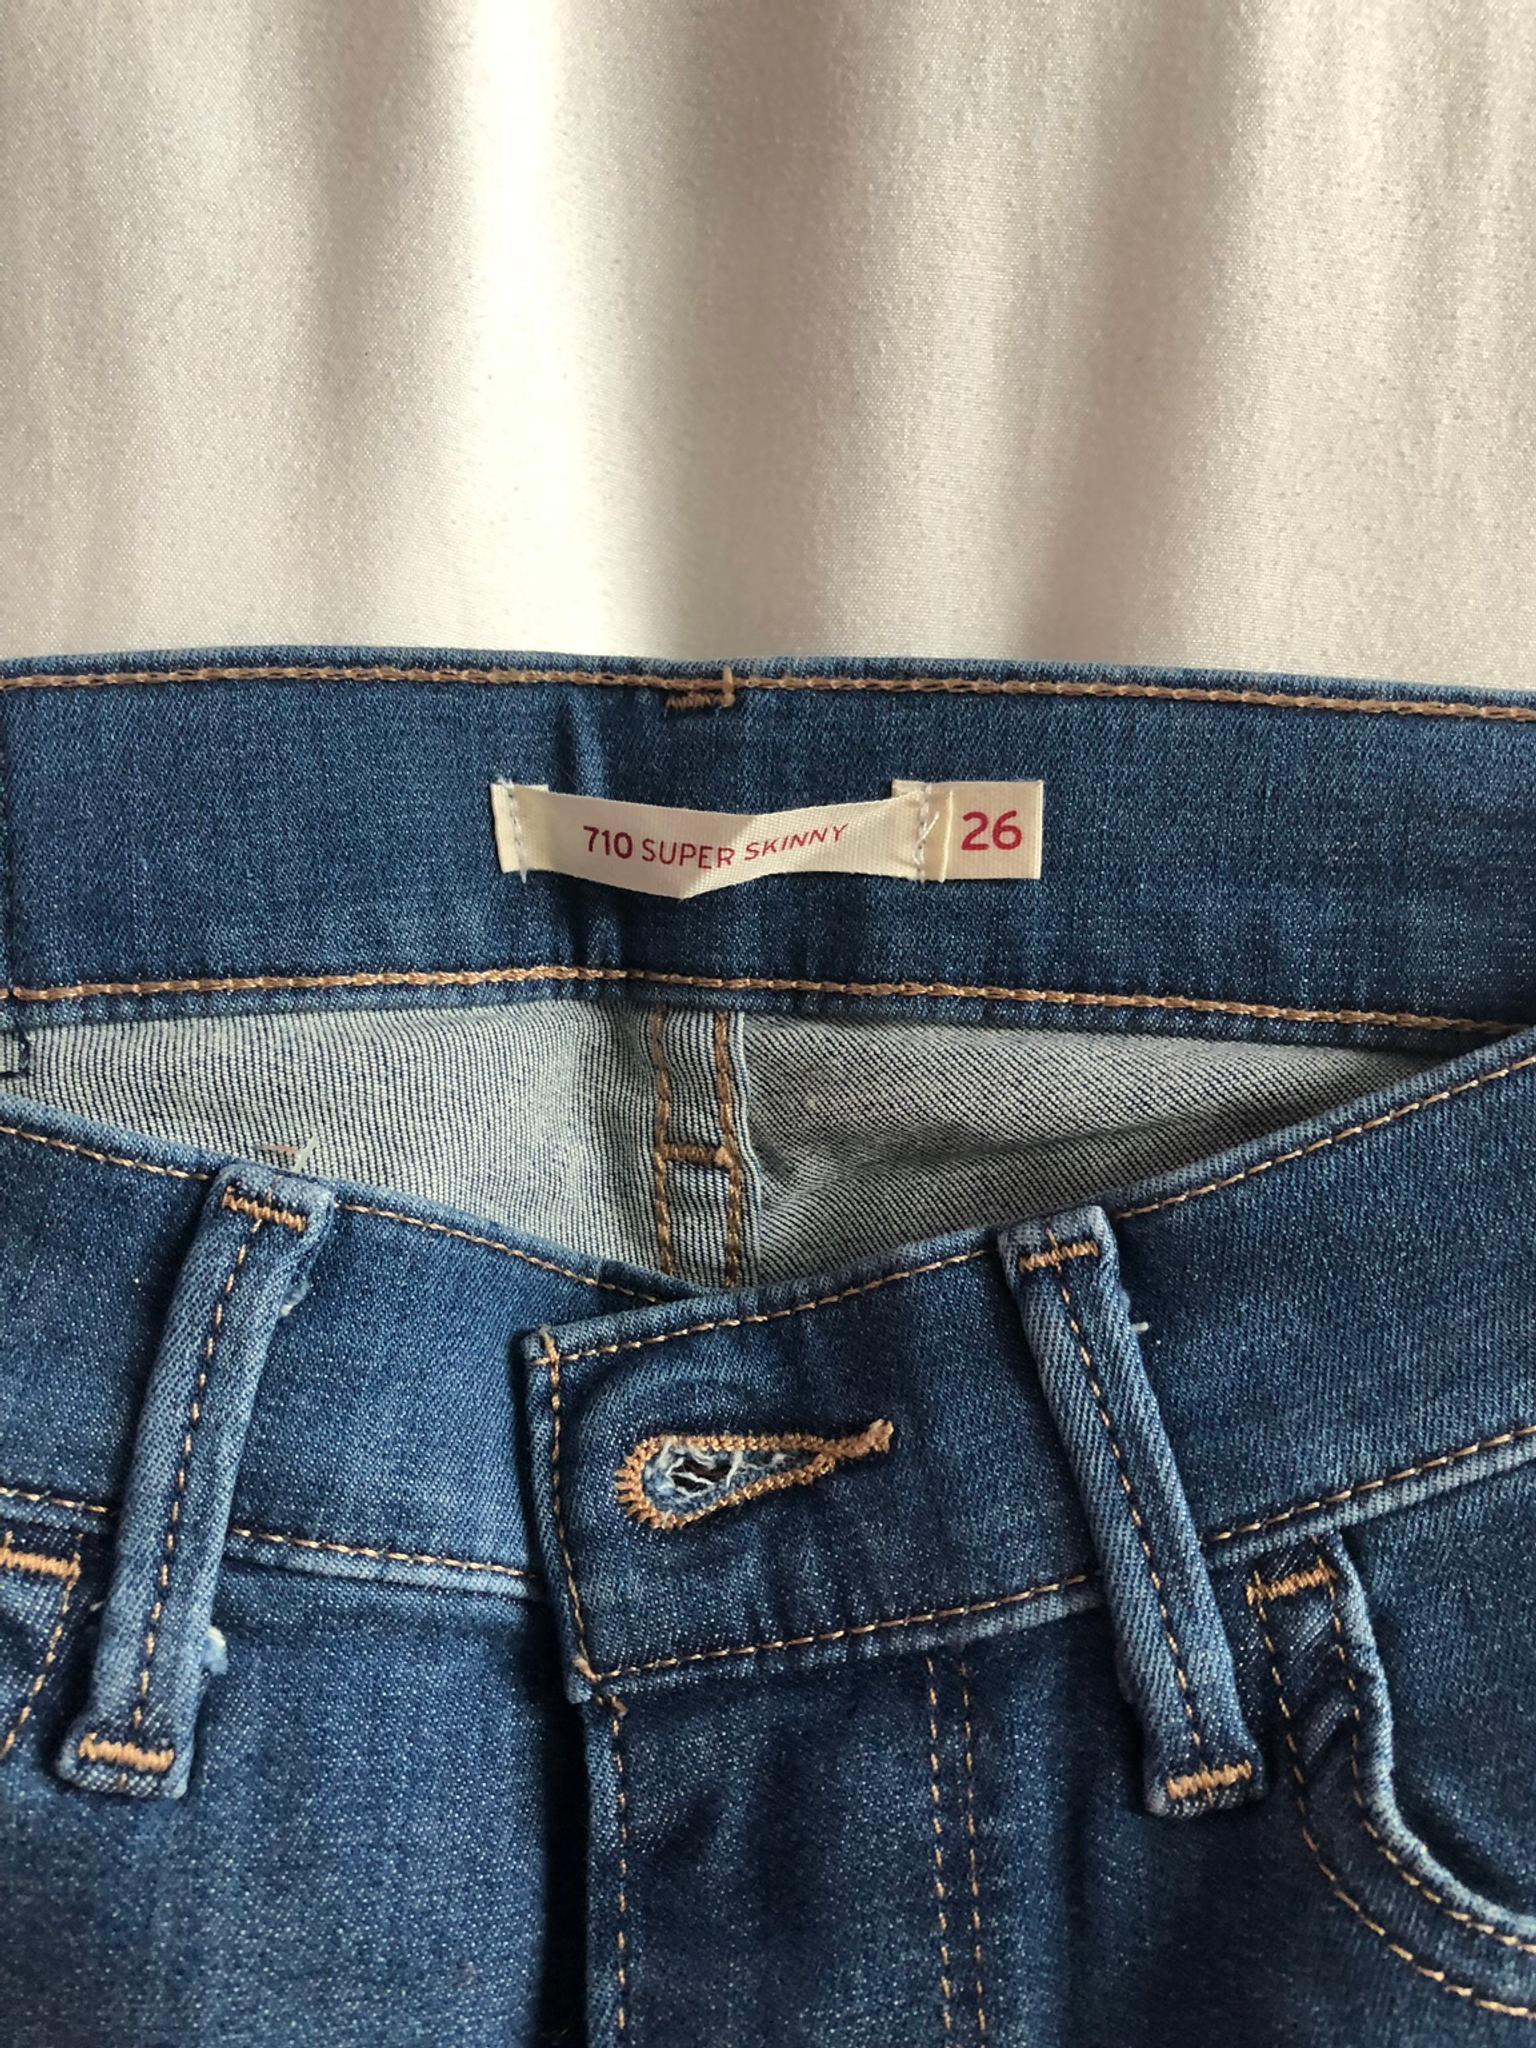 size 26 in levis